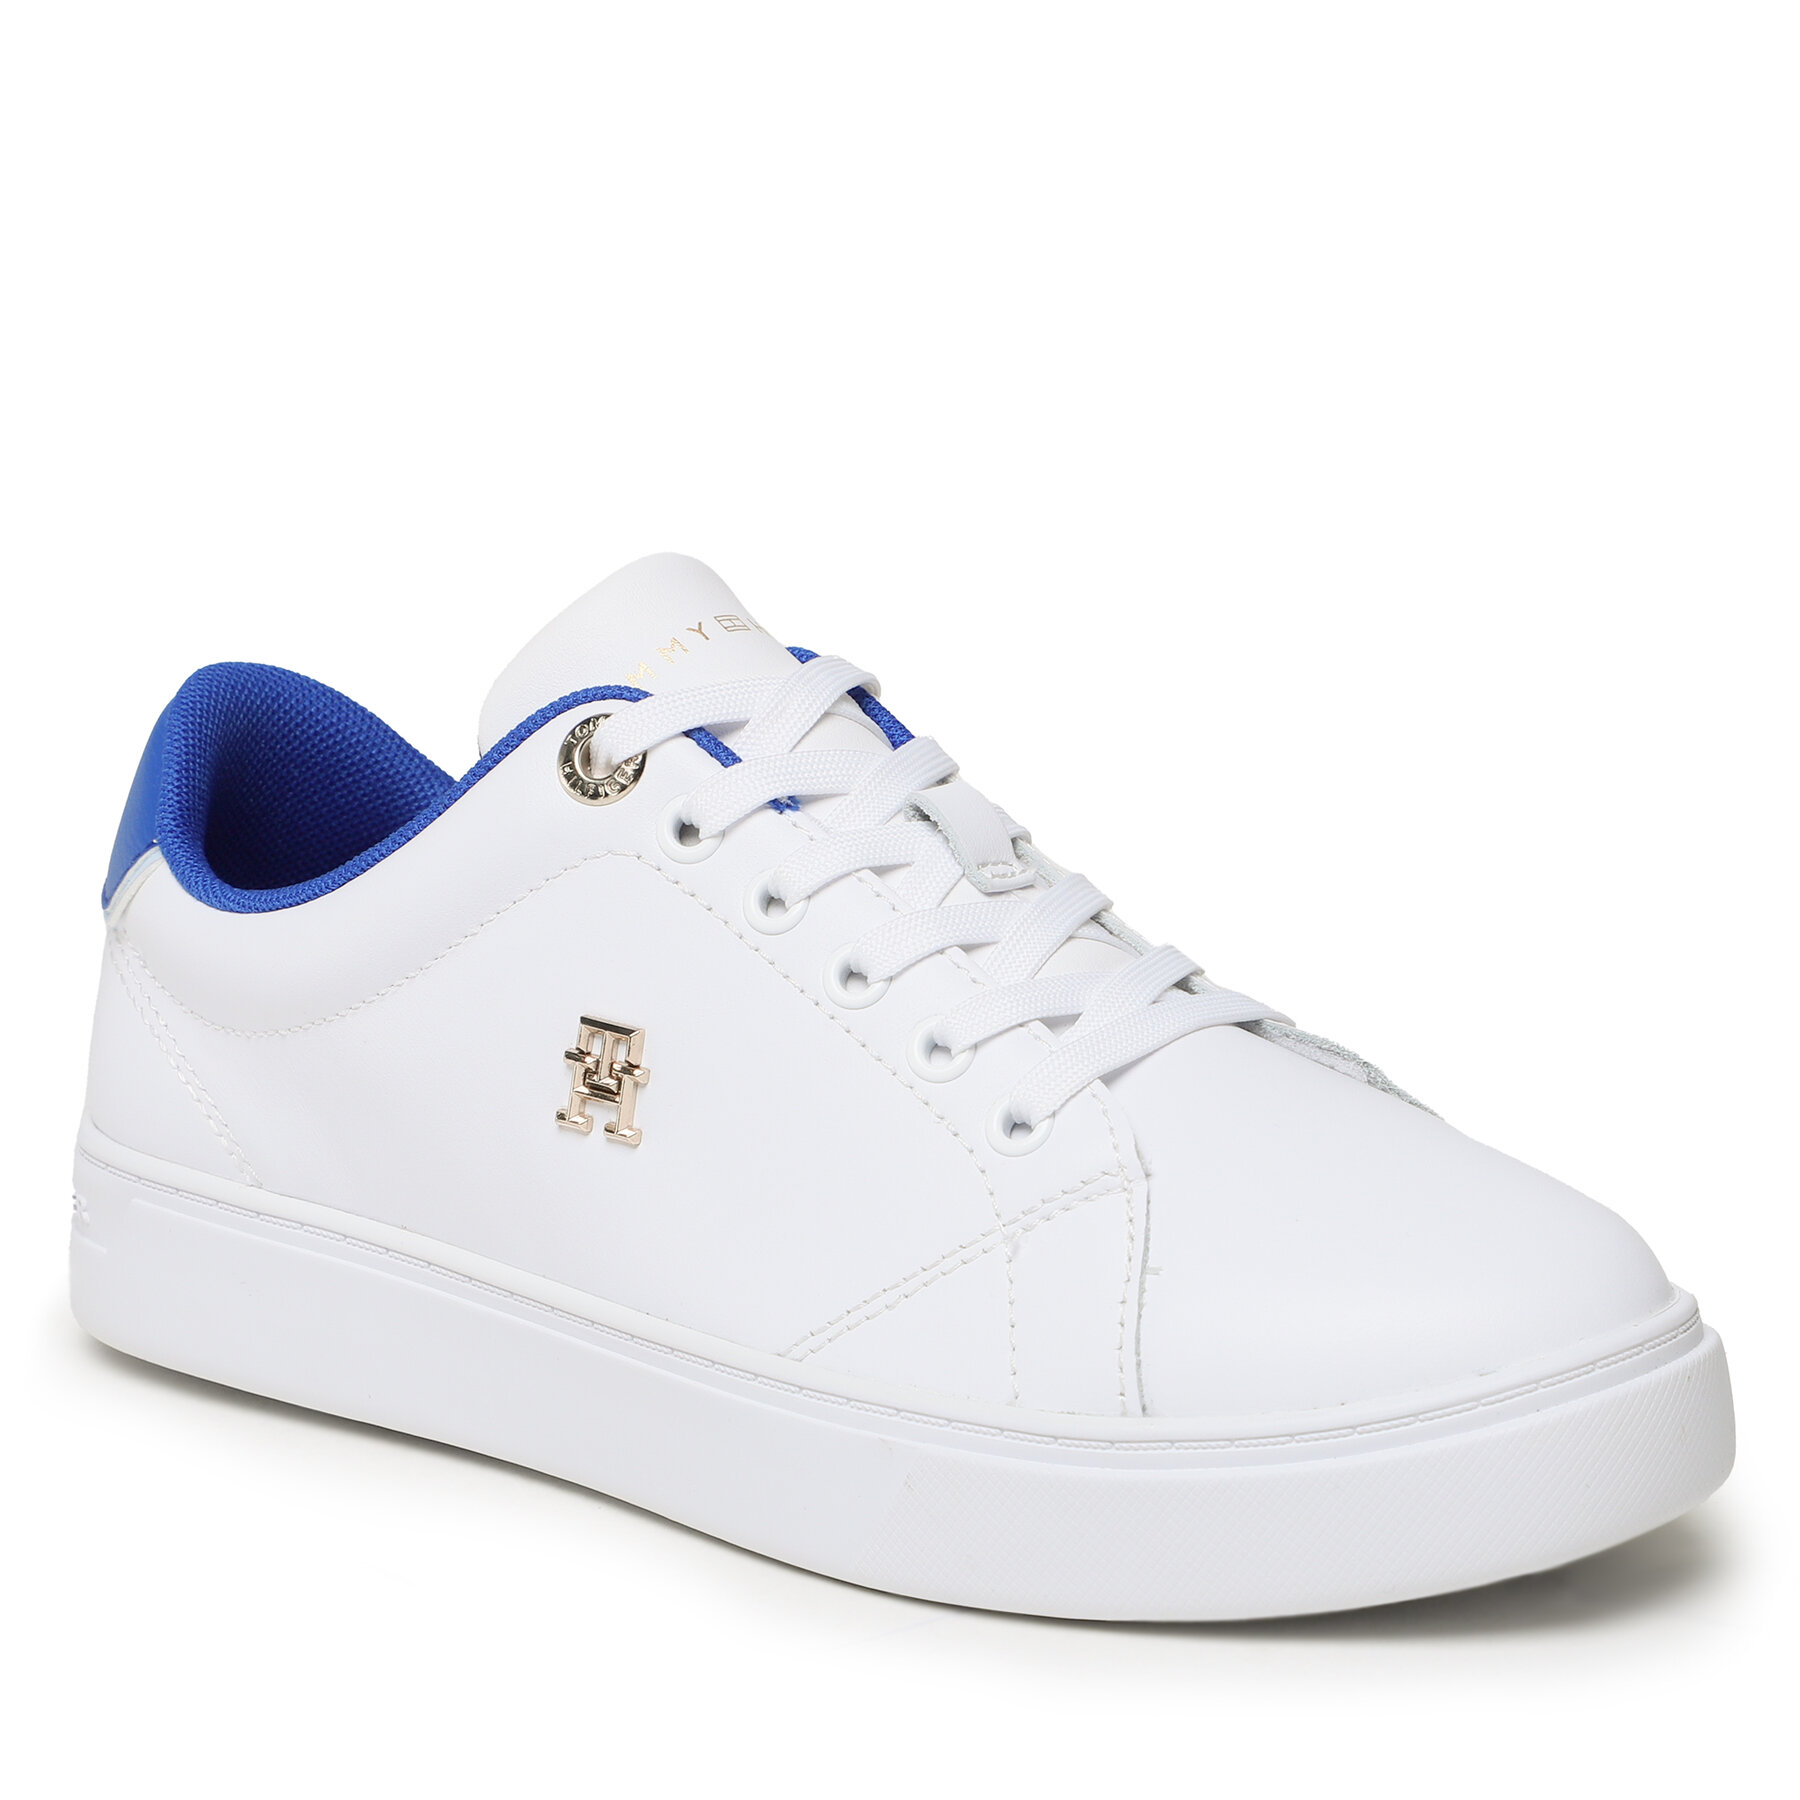 Sneakers Tommy Hilfiger Elevated Essential Court Sneakers FW0FW07377 White YS epantofi.ro imagine noua